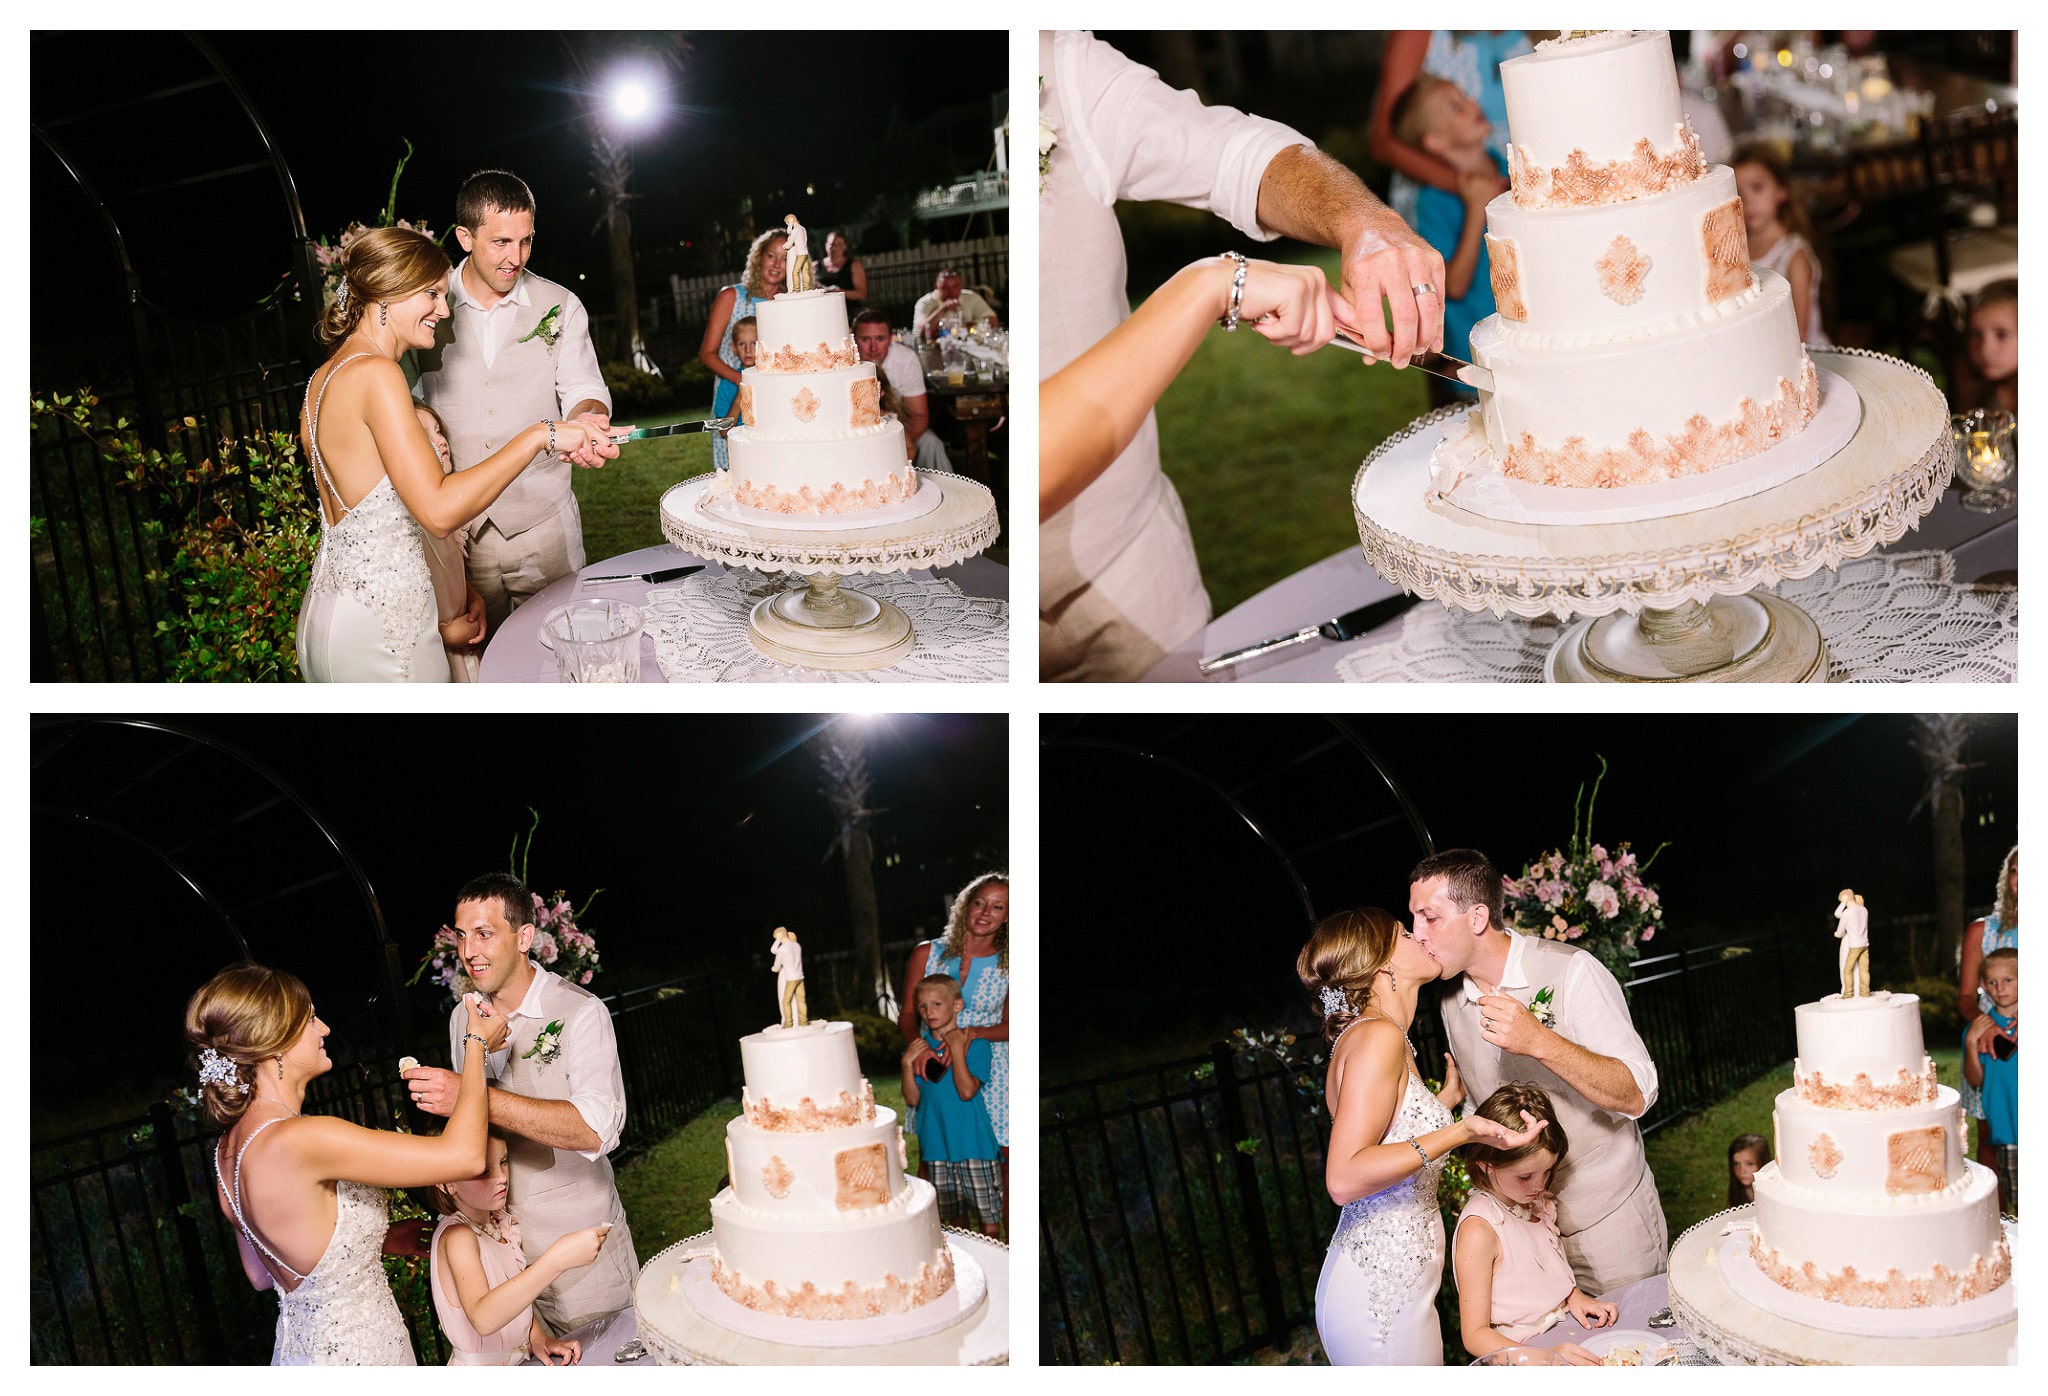 Bride and Groom cutting the cake and feeding each other a small piece - Venue - Beach House Gulf Stream Breeze, Beach Realty Catering and Cake - Buttercream Cakes and Catering, LLC Flowers - Callas Florist Event Rentals - Event Works DJ - Scott Shaw